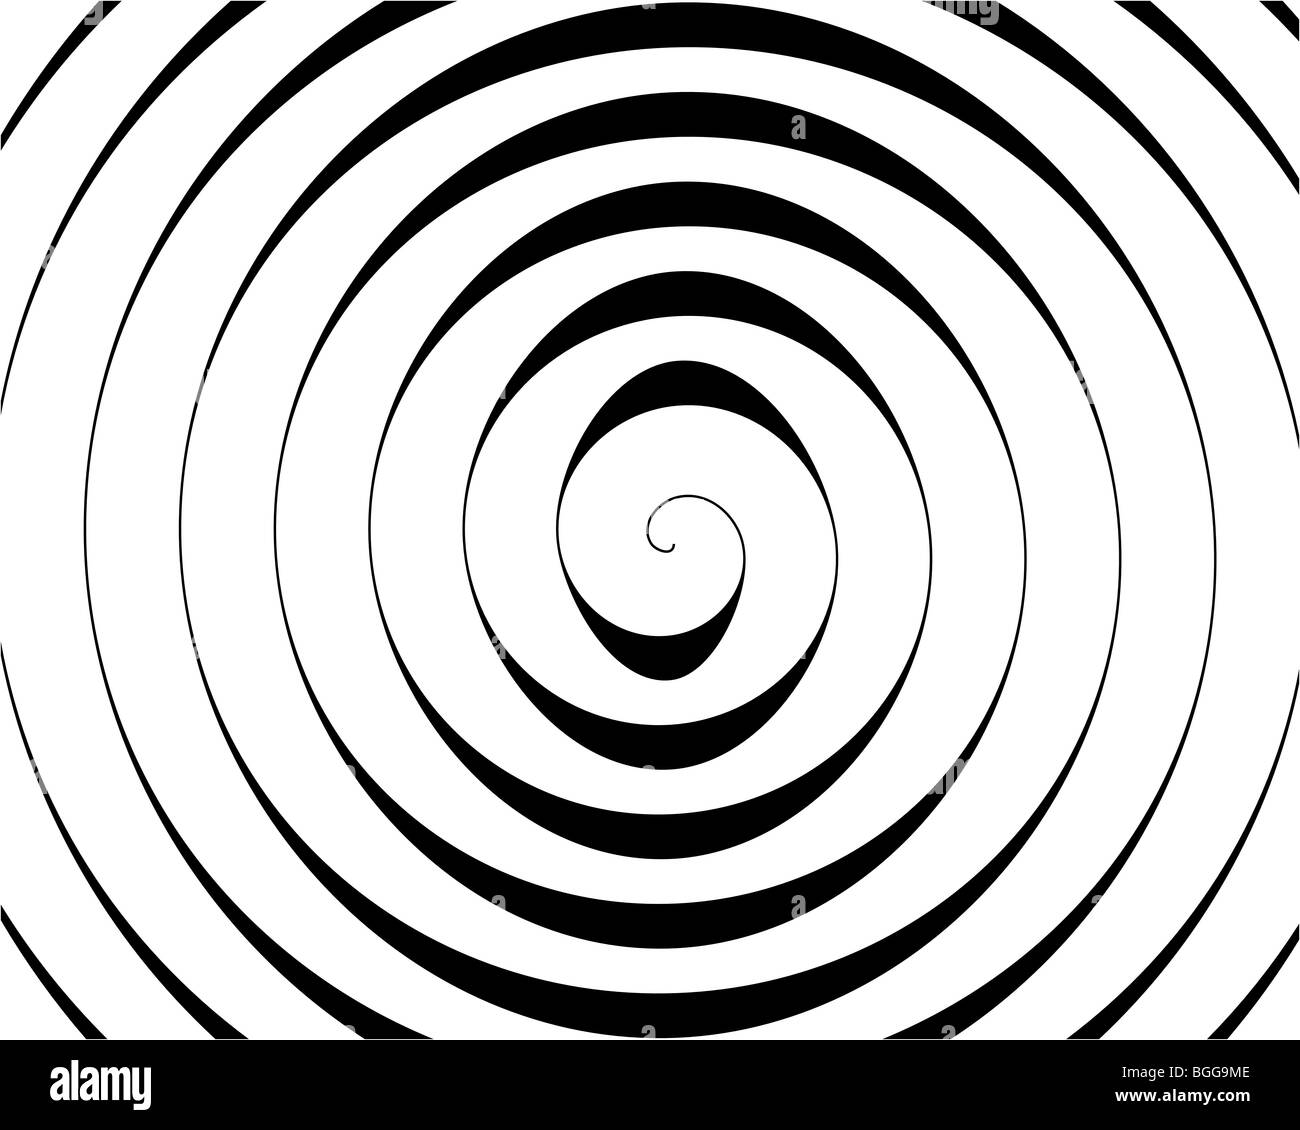 Detail of a black spiral on white background Stock Photo